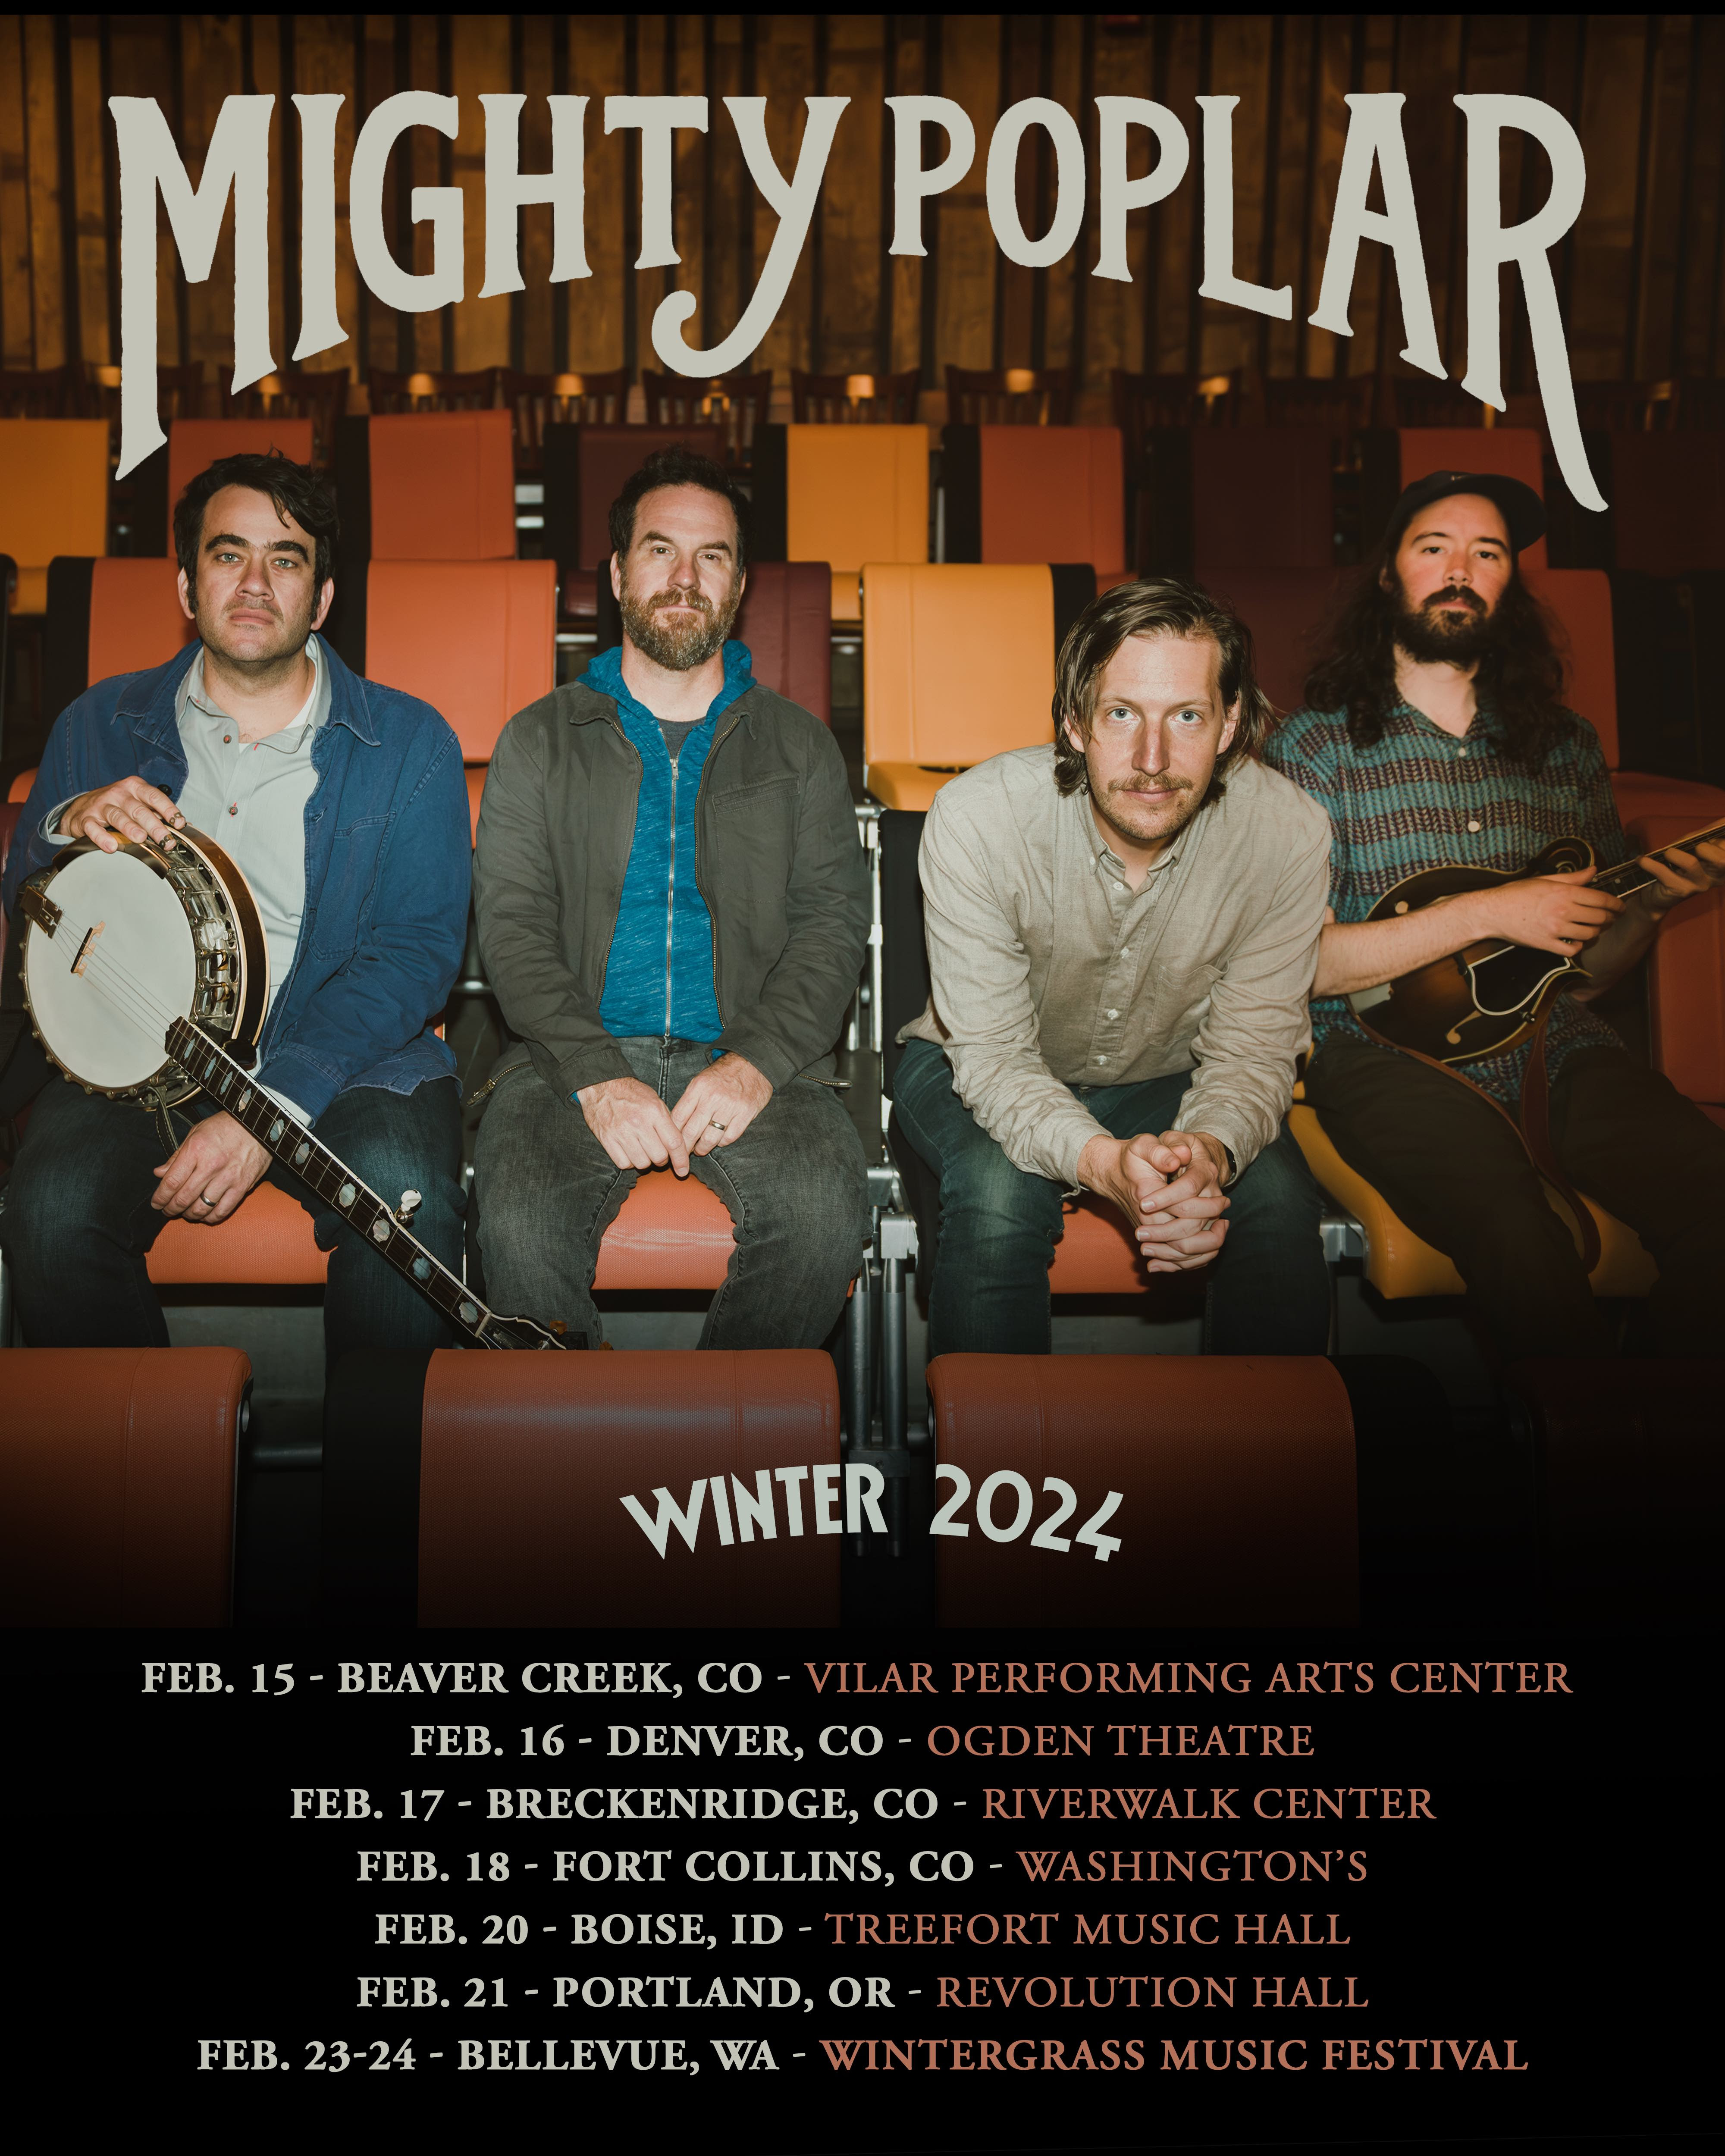 Hot off a GRAMMY nom, Mighty Poplar hitting the road for Winter 2024 Tour